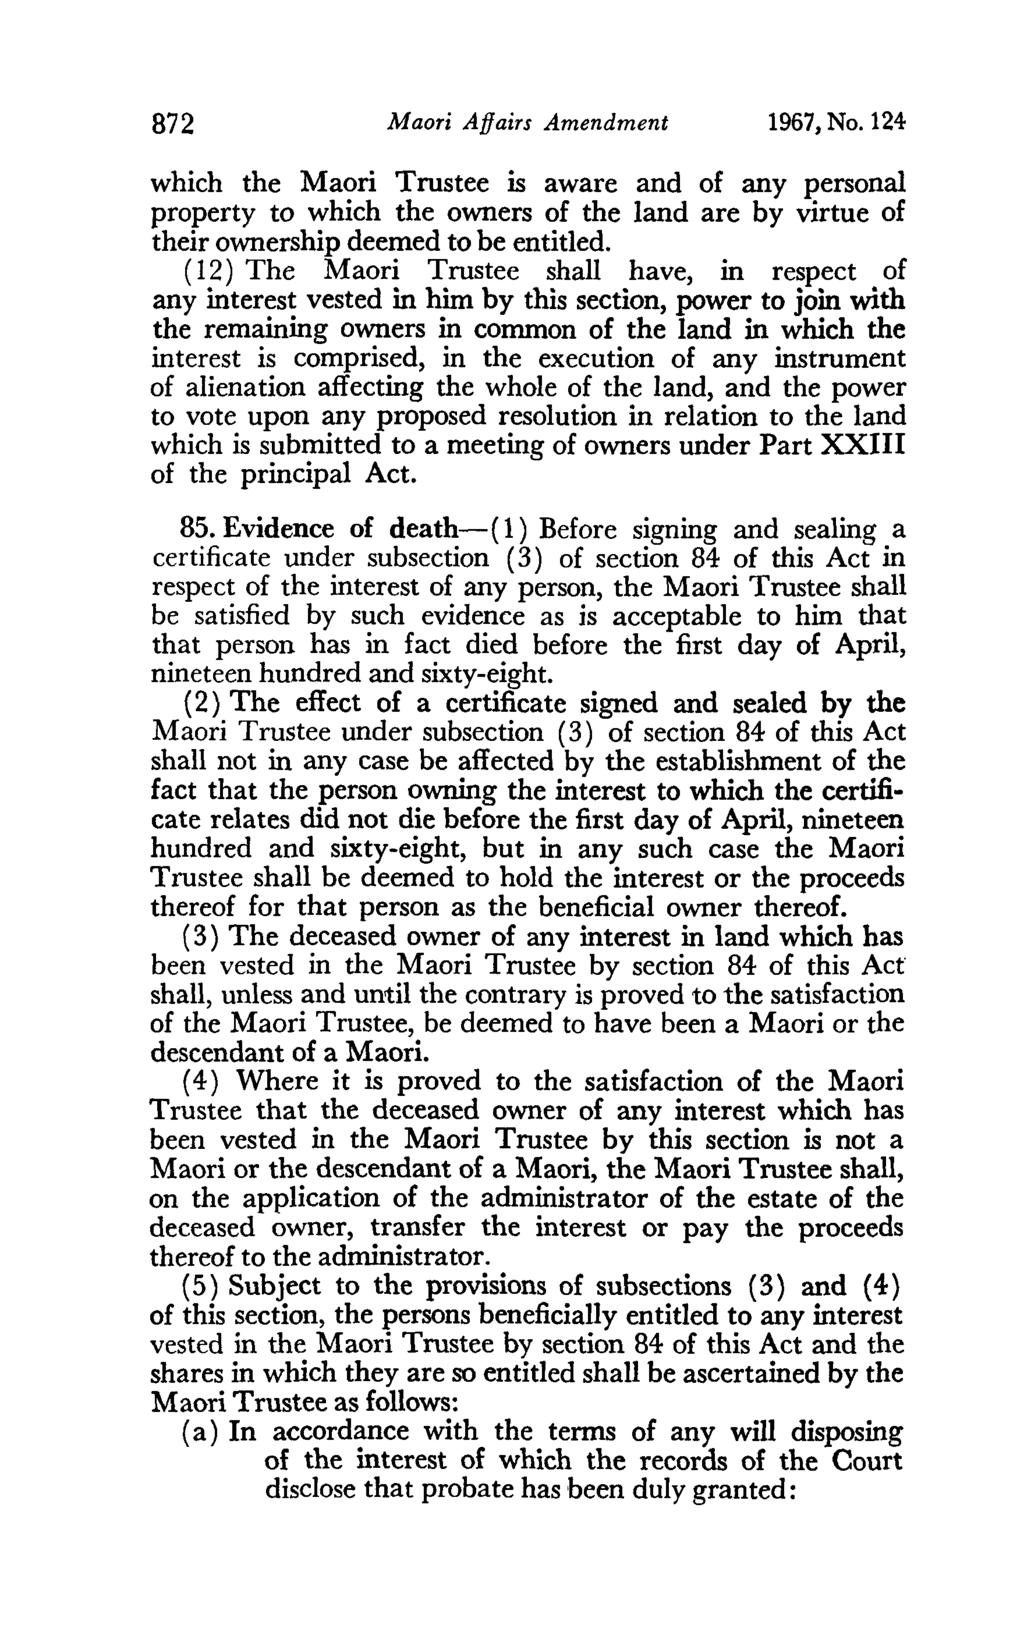 872 Maori Affairs Amendment 1967, No. 124 which the Maori Trustee is aware and of any personal property to which the owners of the land are by virtue of their ownership deemed to be entitled.